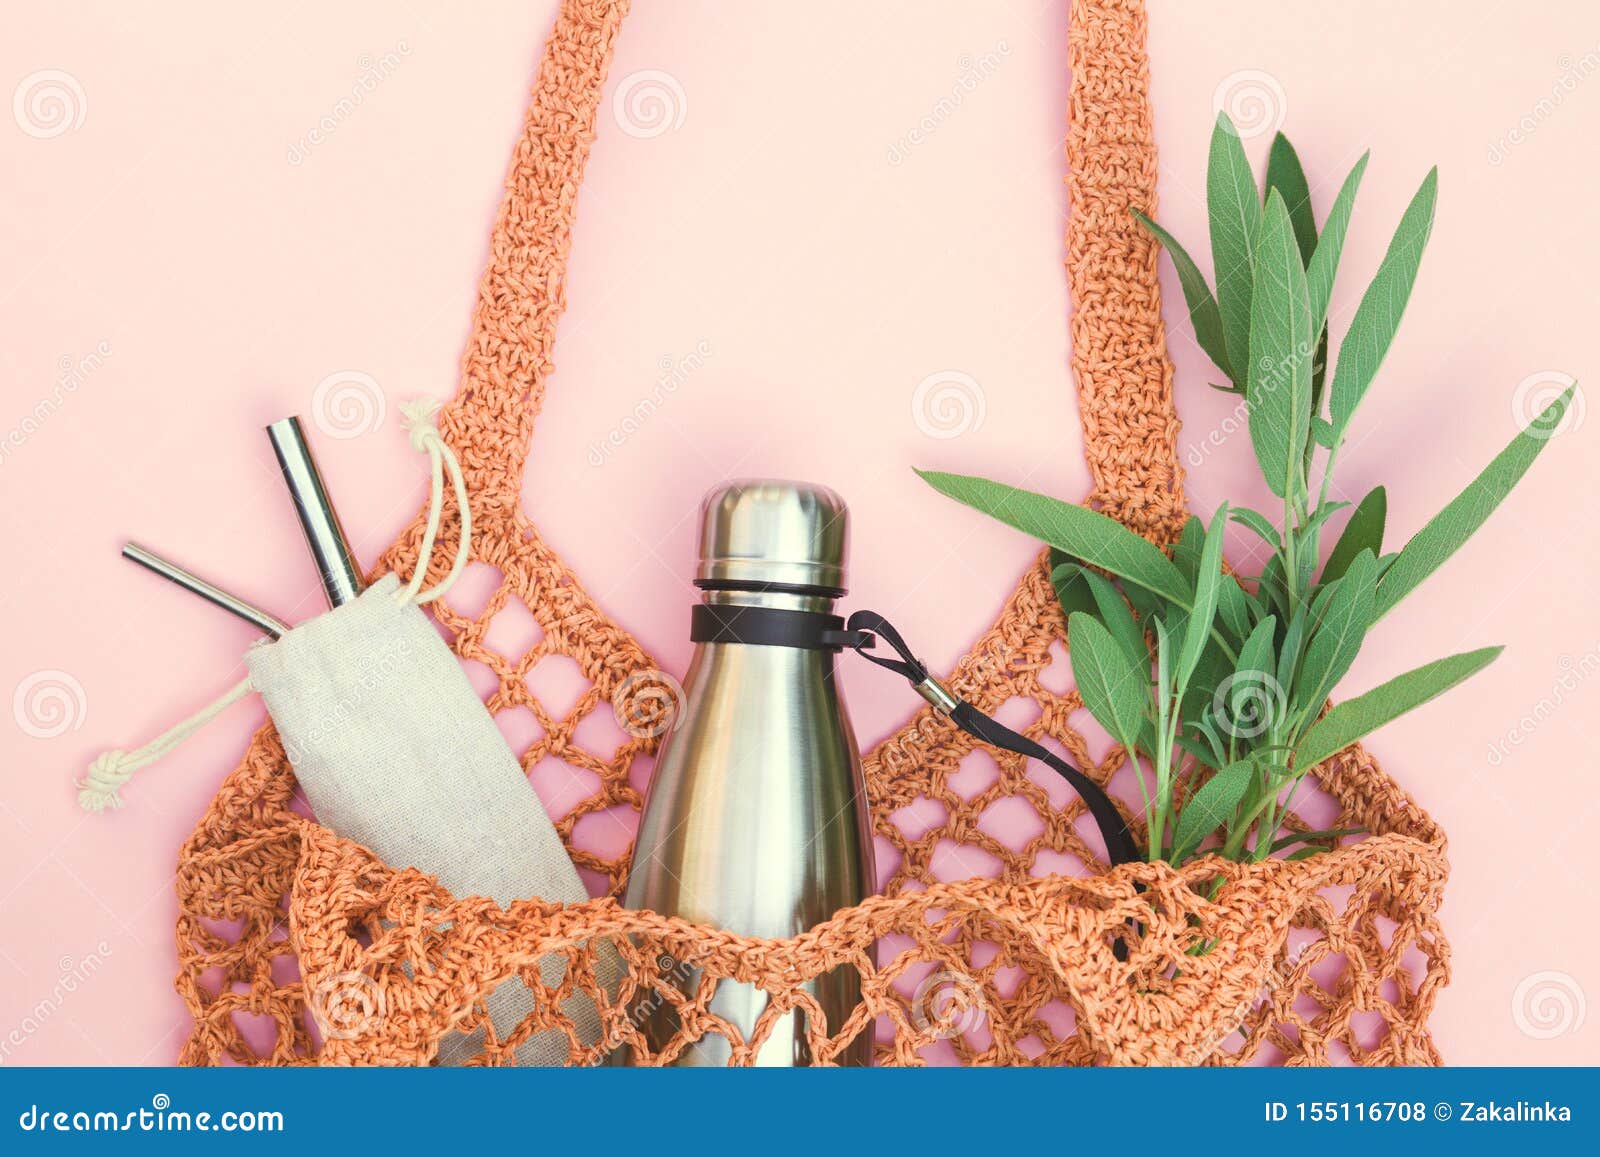 string bag with reusable water bottle and metal straws, go green and use no single use plastic